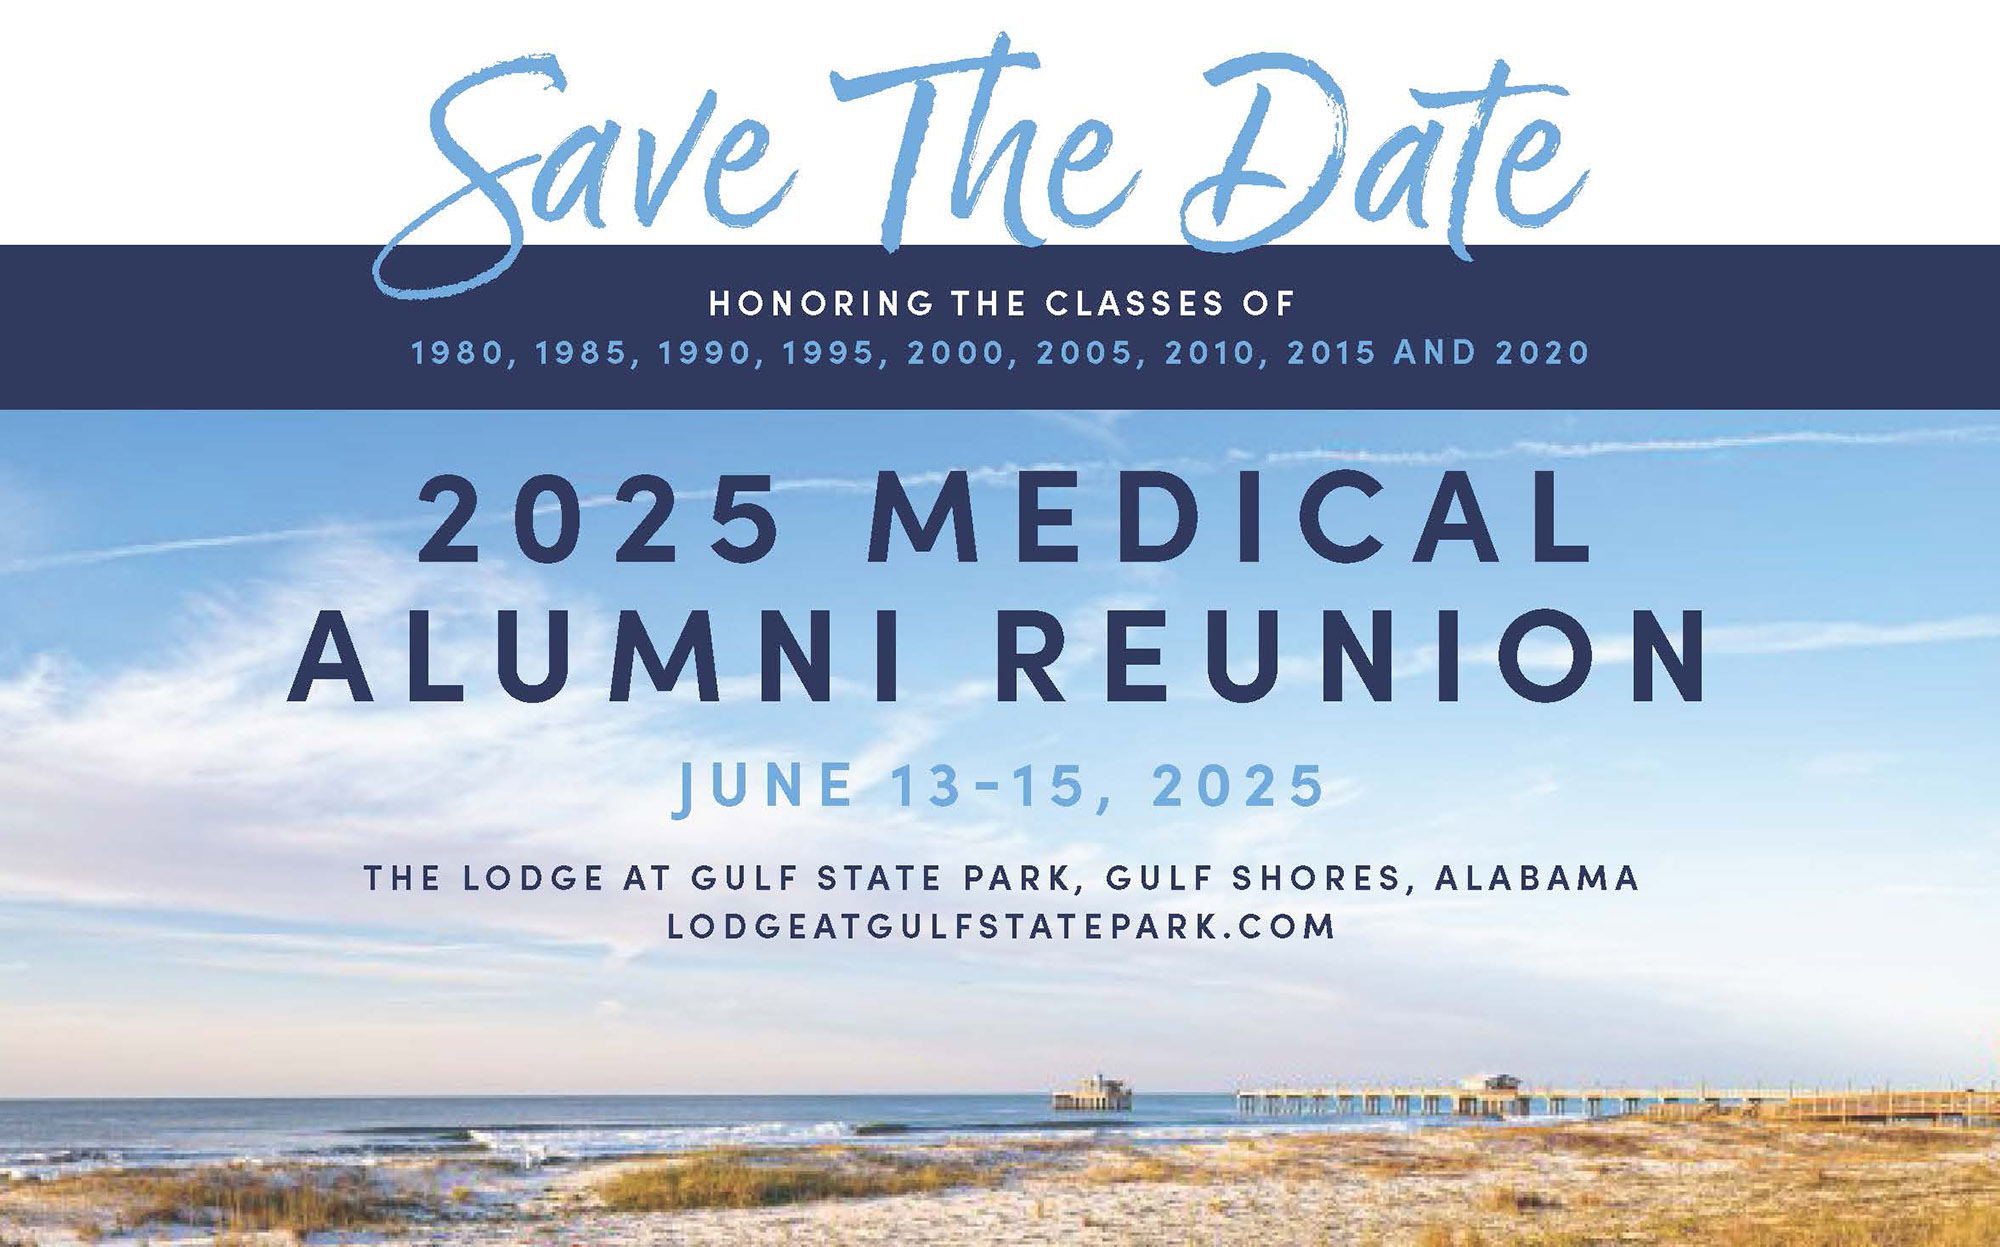 Save the Date for the MAA Reunion in 2025